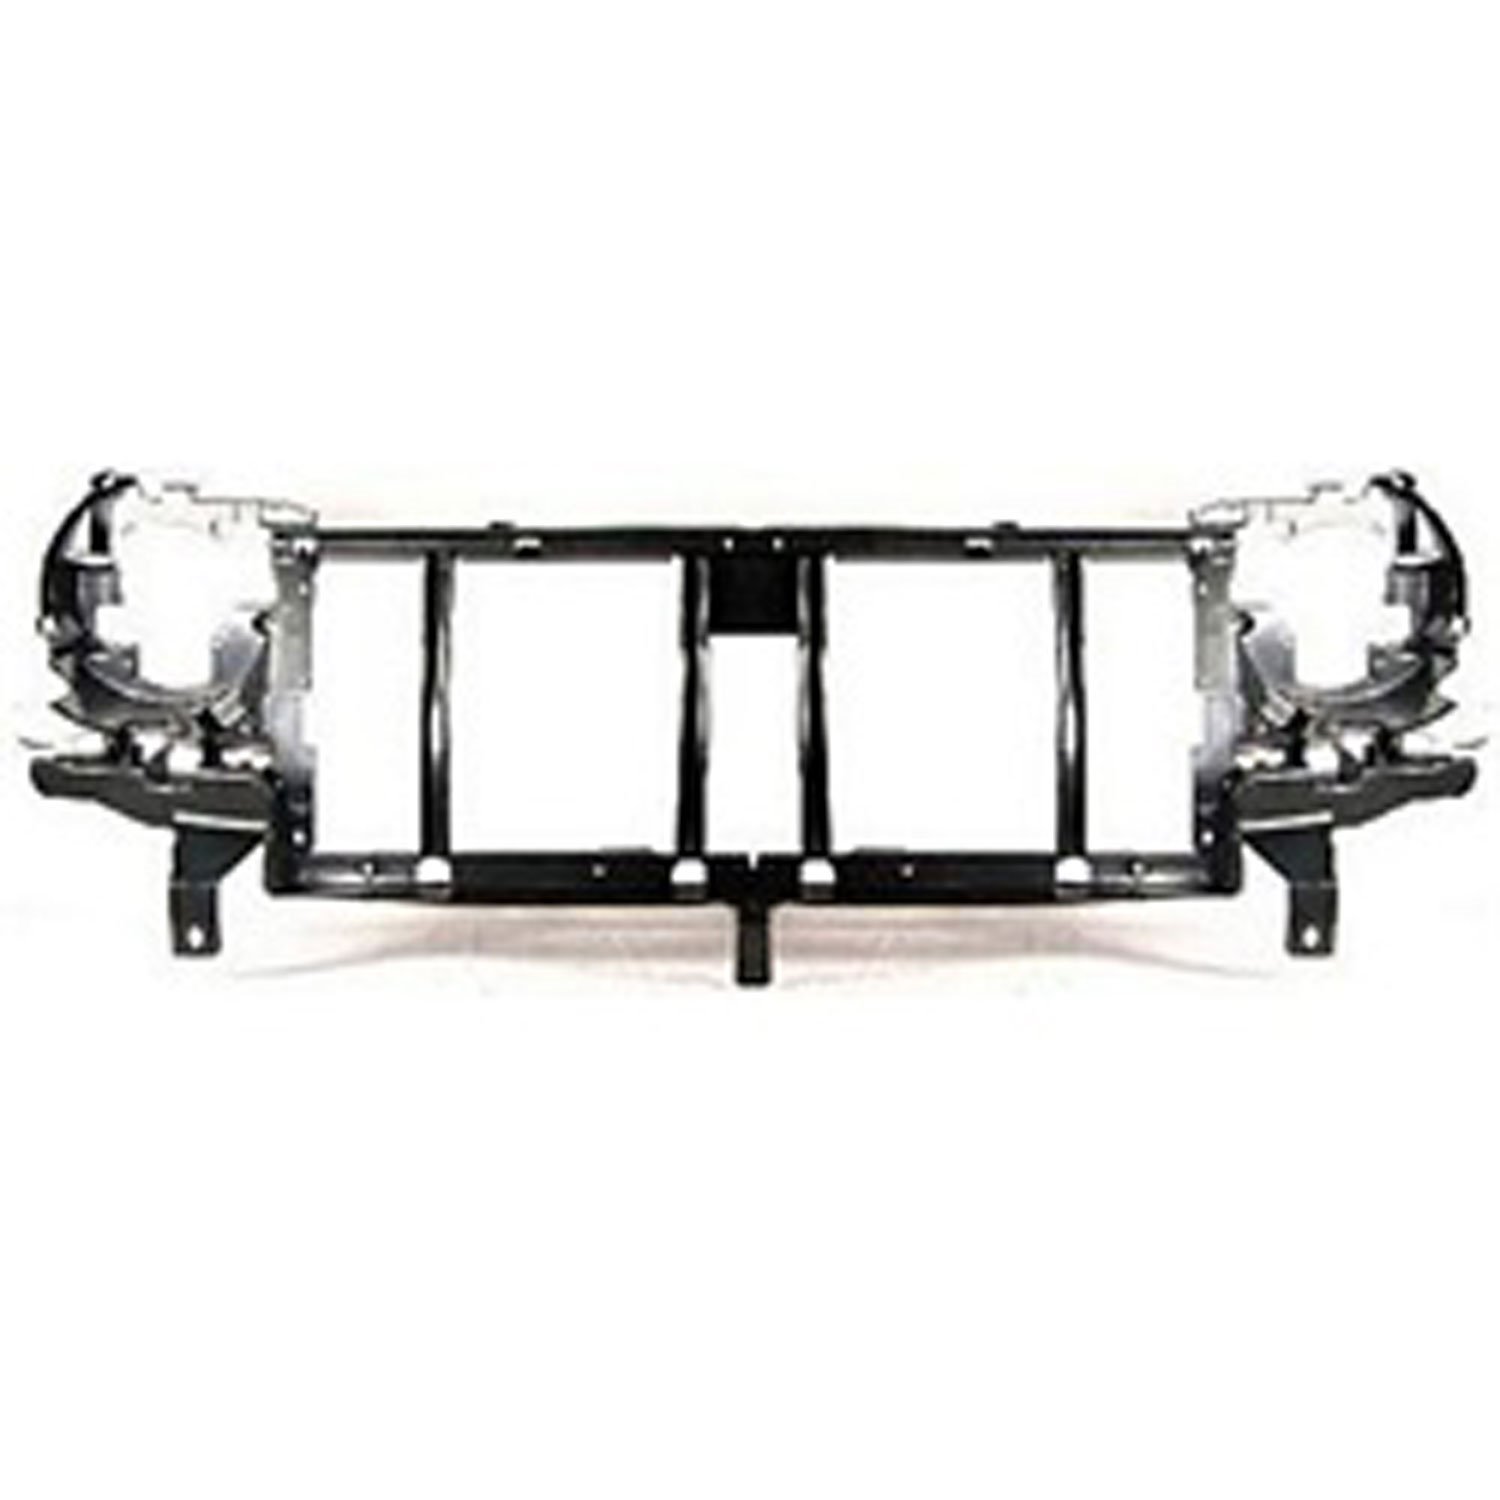 This grille support from Omix-ADA fits 02-04 Jeep Liberty KJ.